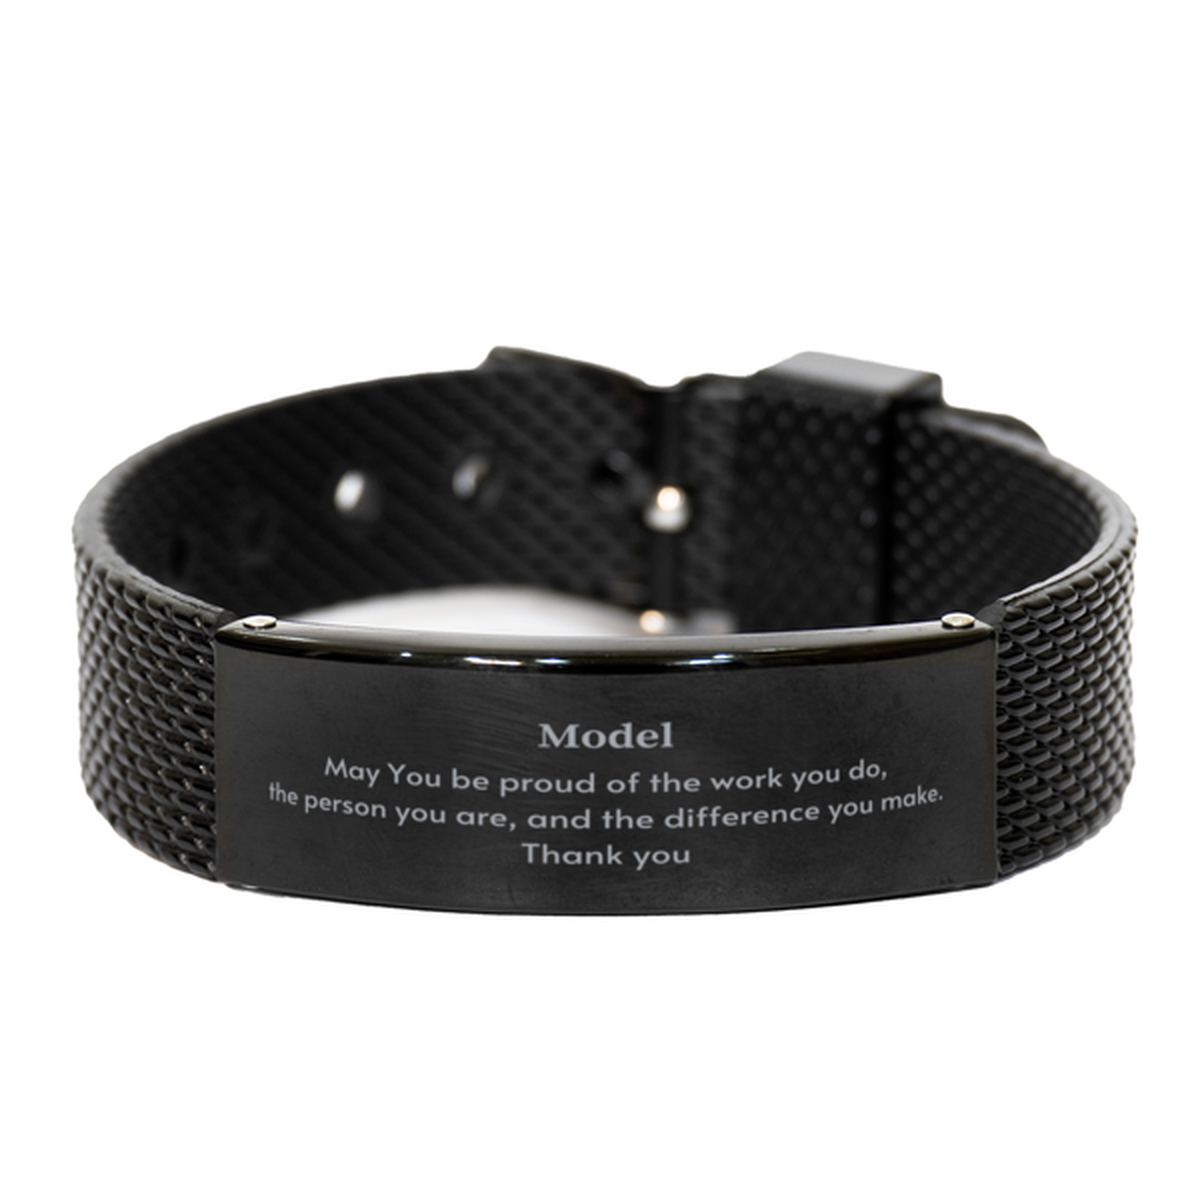 Heartwarming Black Shark Mesh Bracelet Retirement Coworkers Gifts for Model, Model May You be proud of the work you do, the person you are Gifts for Boss Men Women Friends